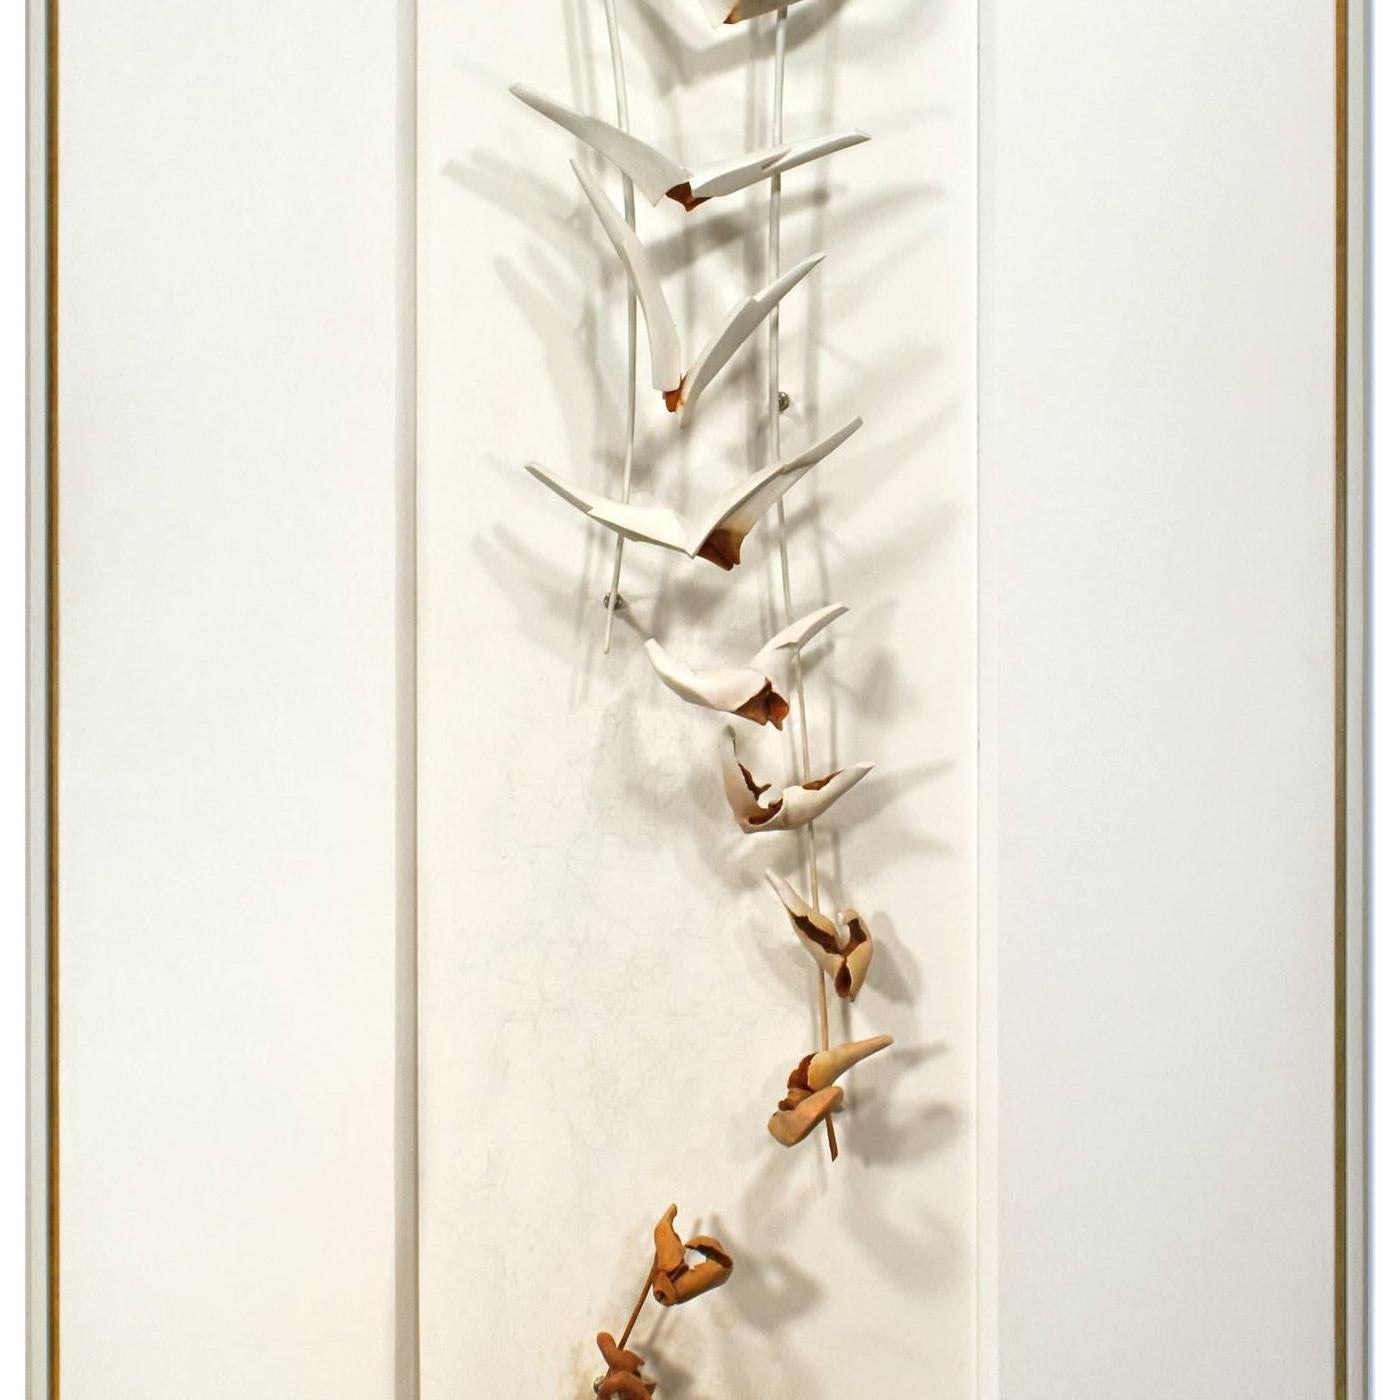 Large Pigment Metal Sculpture: 'Into the Throats of Birds' - Abstract Mixed Media Art by David Mellen